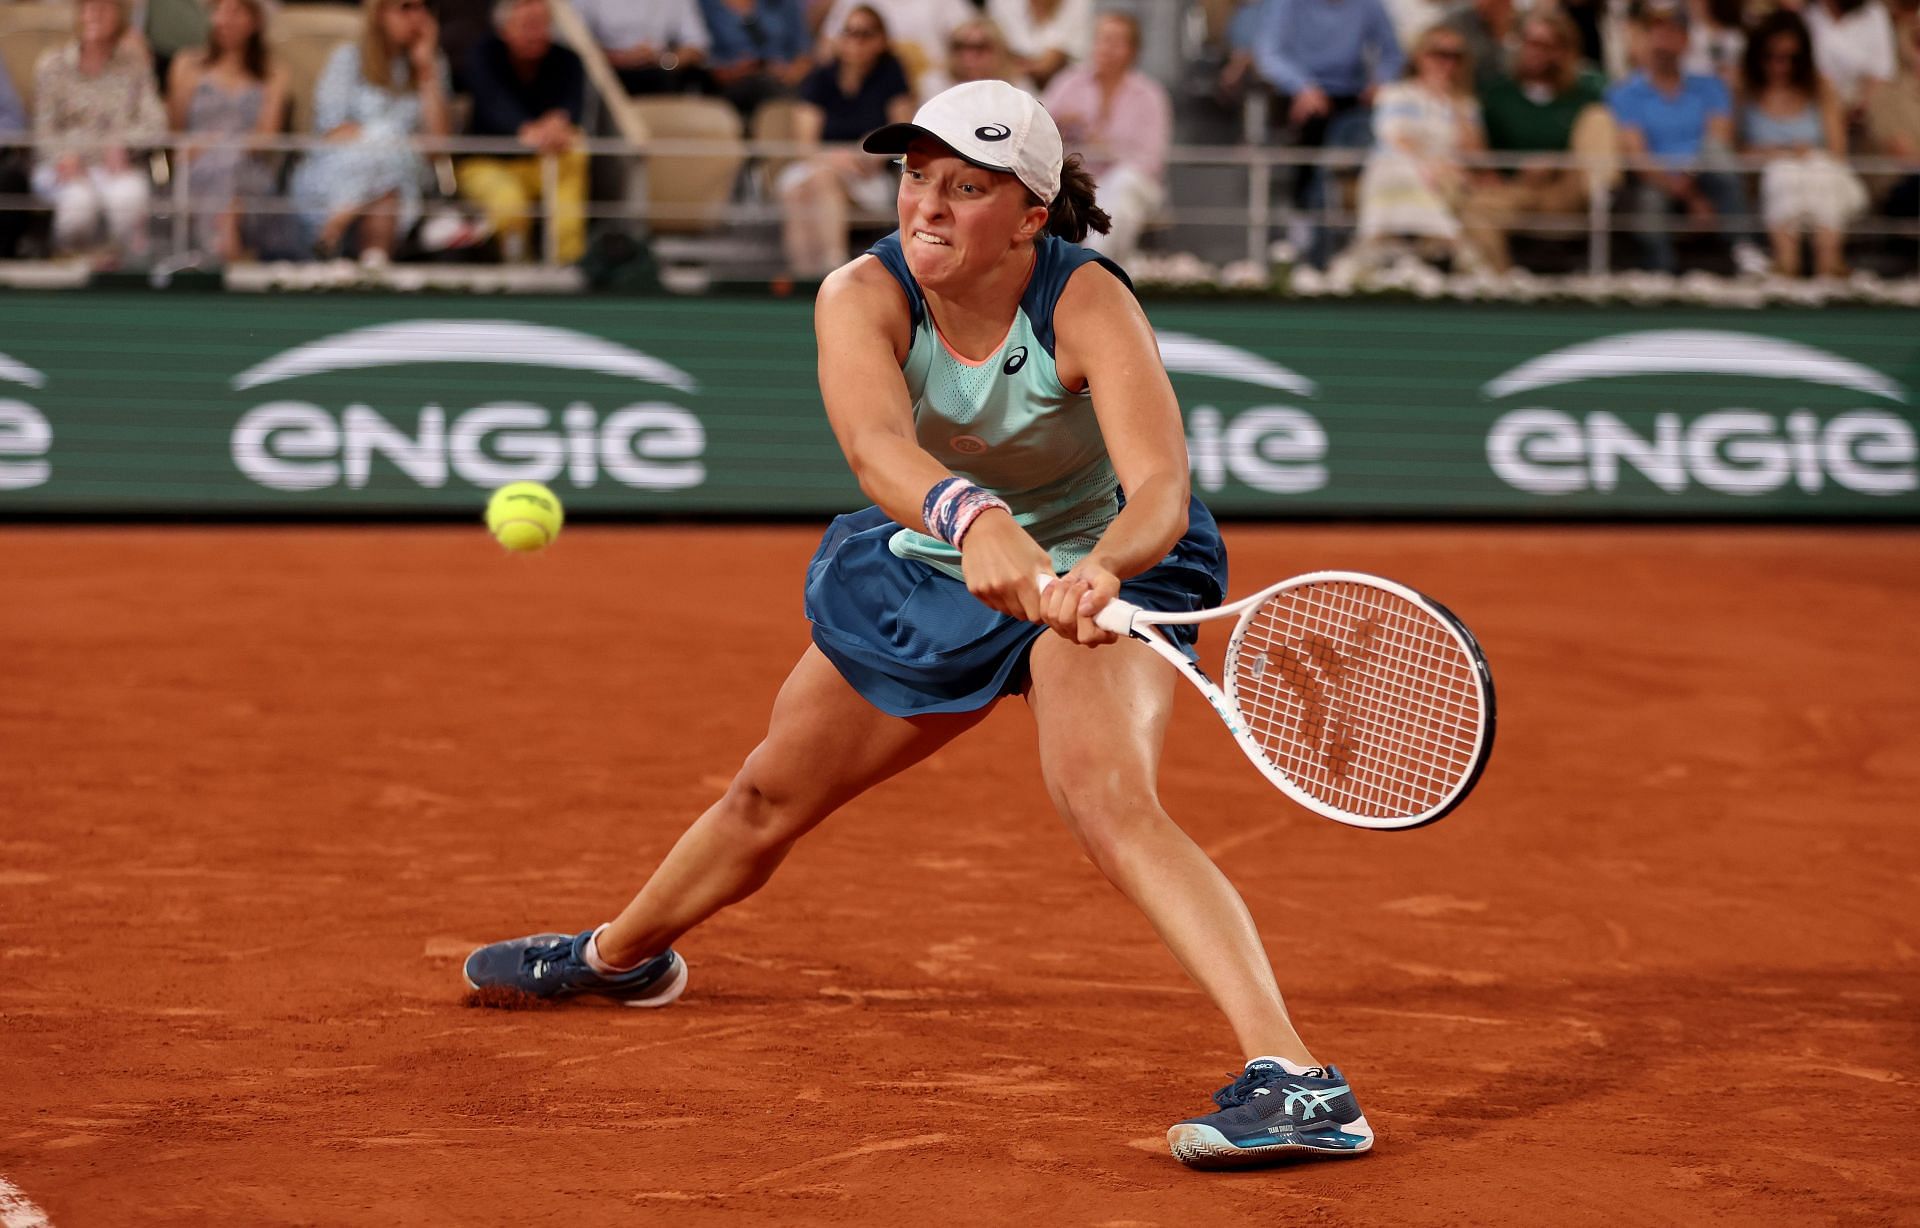 The World No. 1 will look to extend her clay-court winning streak to 19